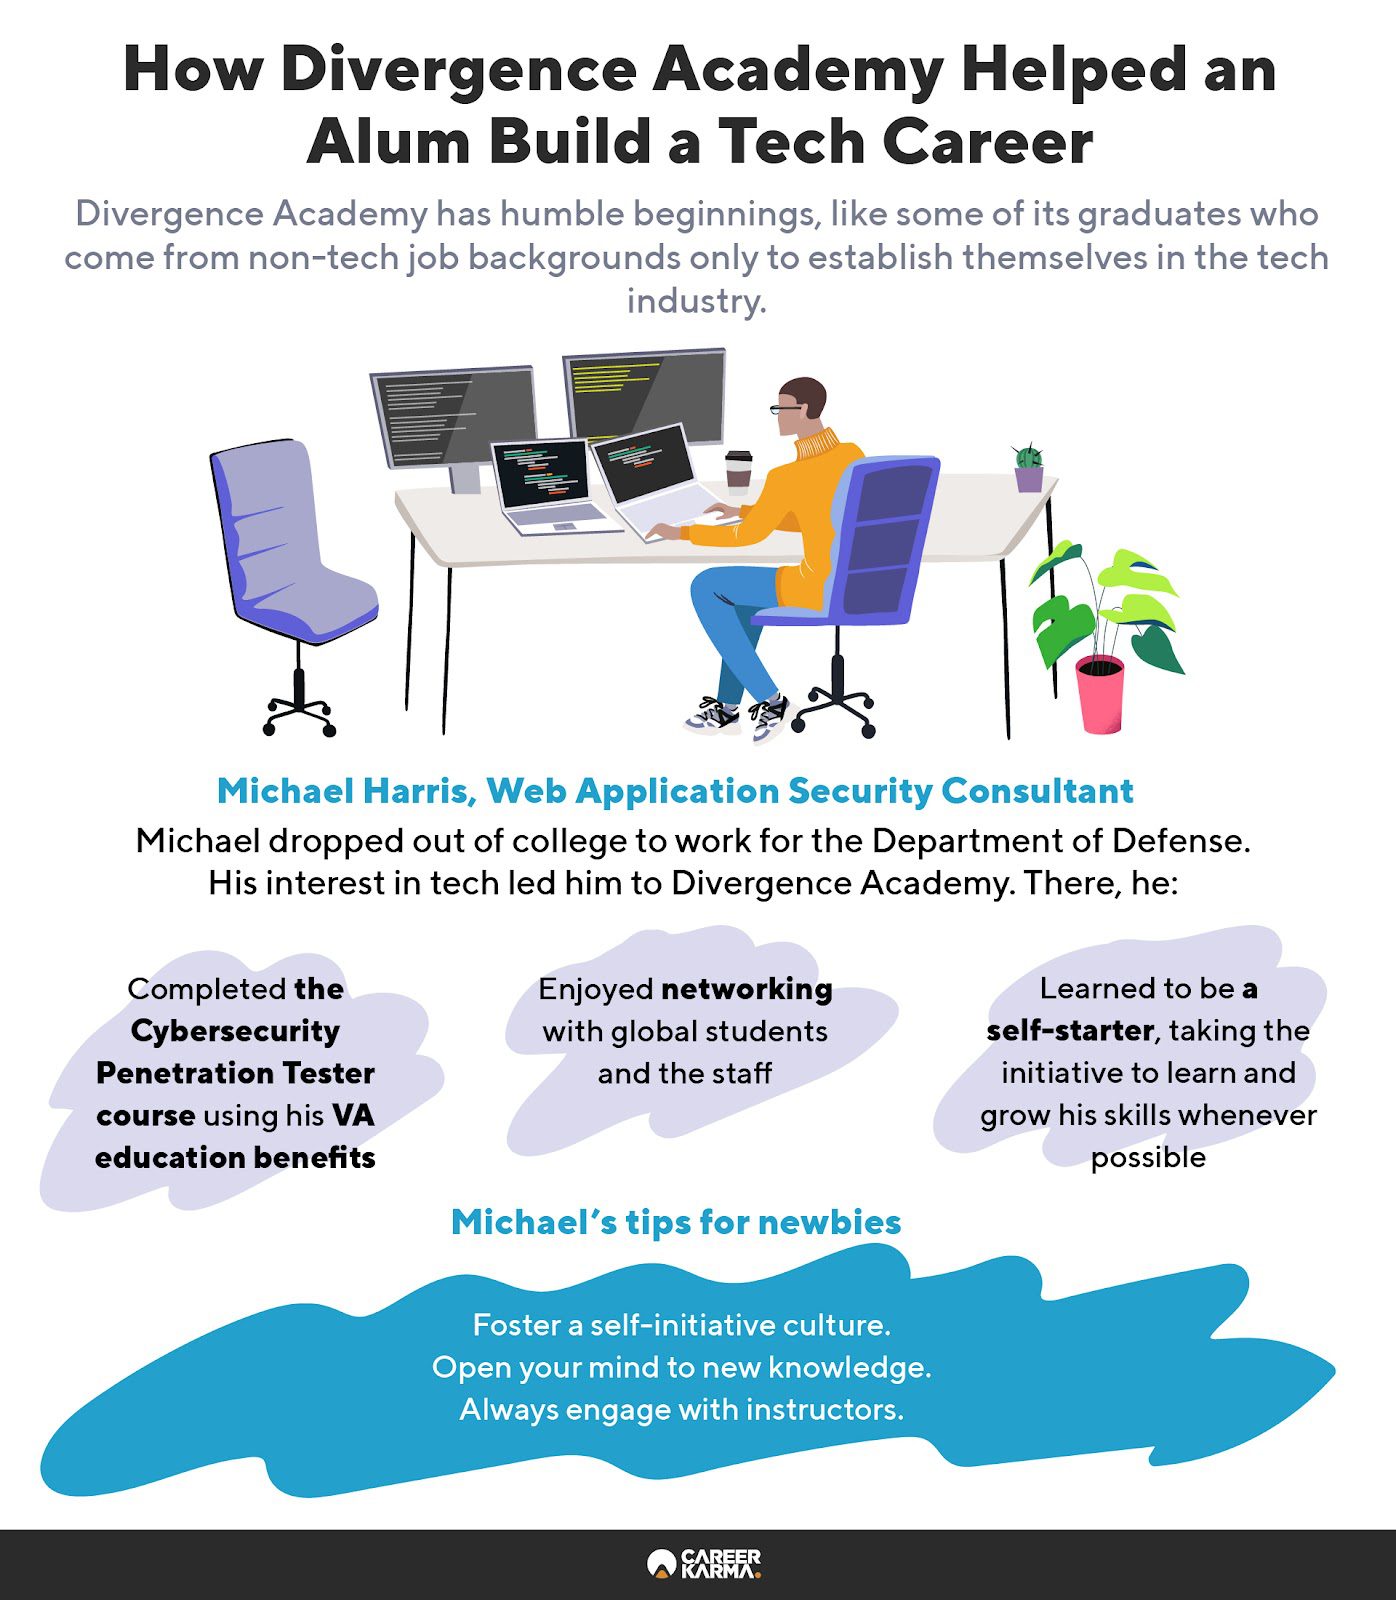 An infographic featuring an alum’s learning experience at Divergence Academy 